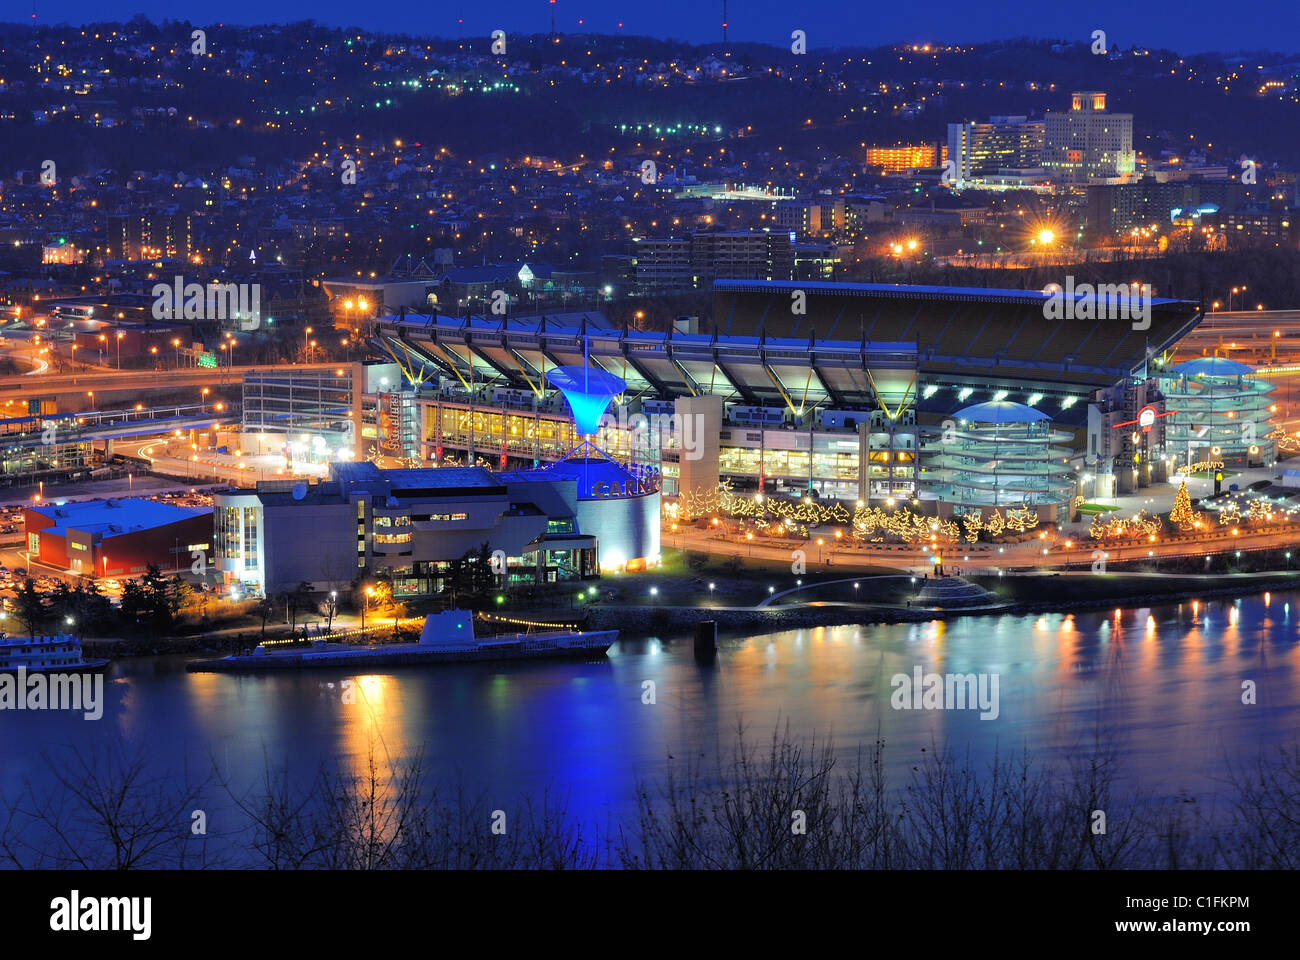 Heinz Field is the home of the Pittsburgh Steelers, a NFL team located in Pittsburgh, Pennsylvania. Stock Photo